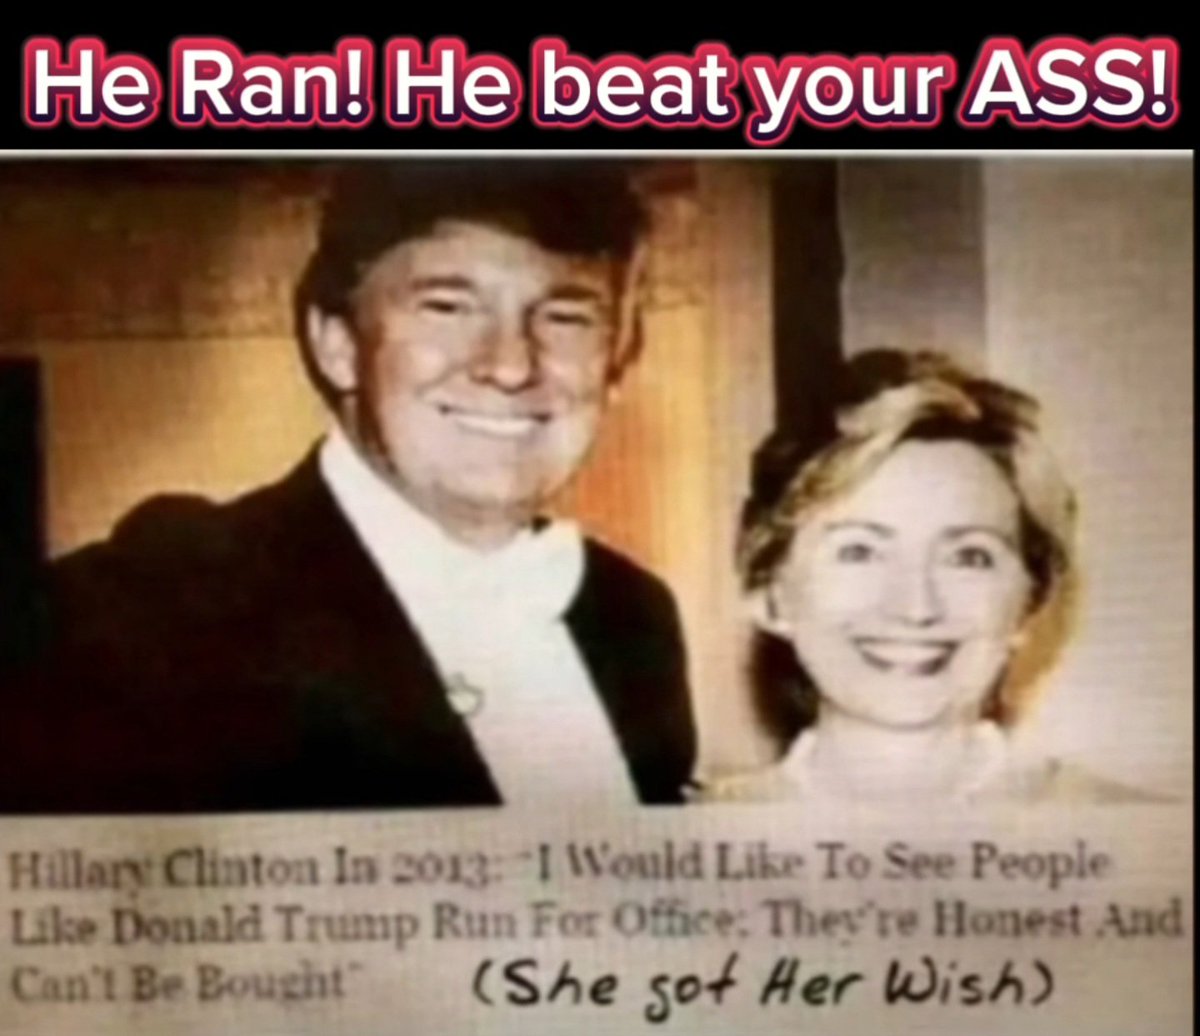 2013! Different times! Hillary loves Trump!!! 🤣🤣🤣 She thinks he should run for office, he can't be bought... LIKE HER! 
#2016Election #Trumpwon #HillaryClinton #LasVegasGP #WorldcupFinal #democratscheat #DemocratsHateAmerica #HamasISIS